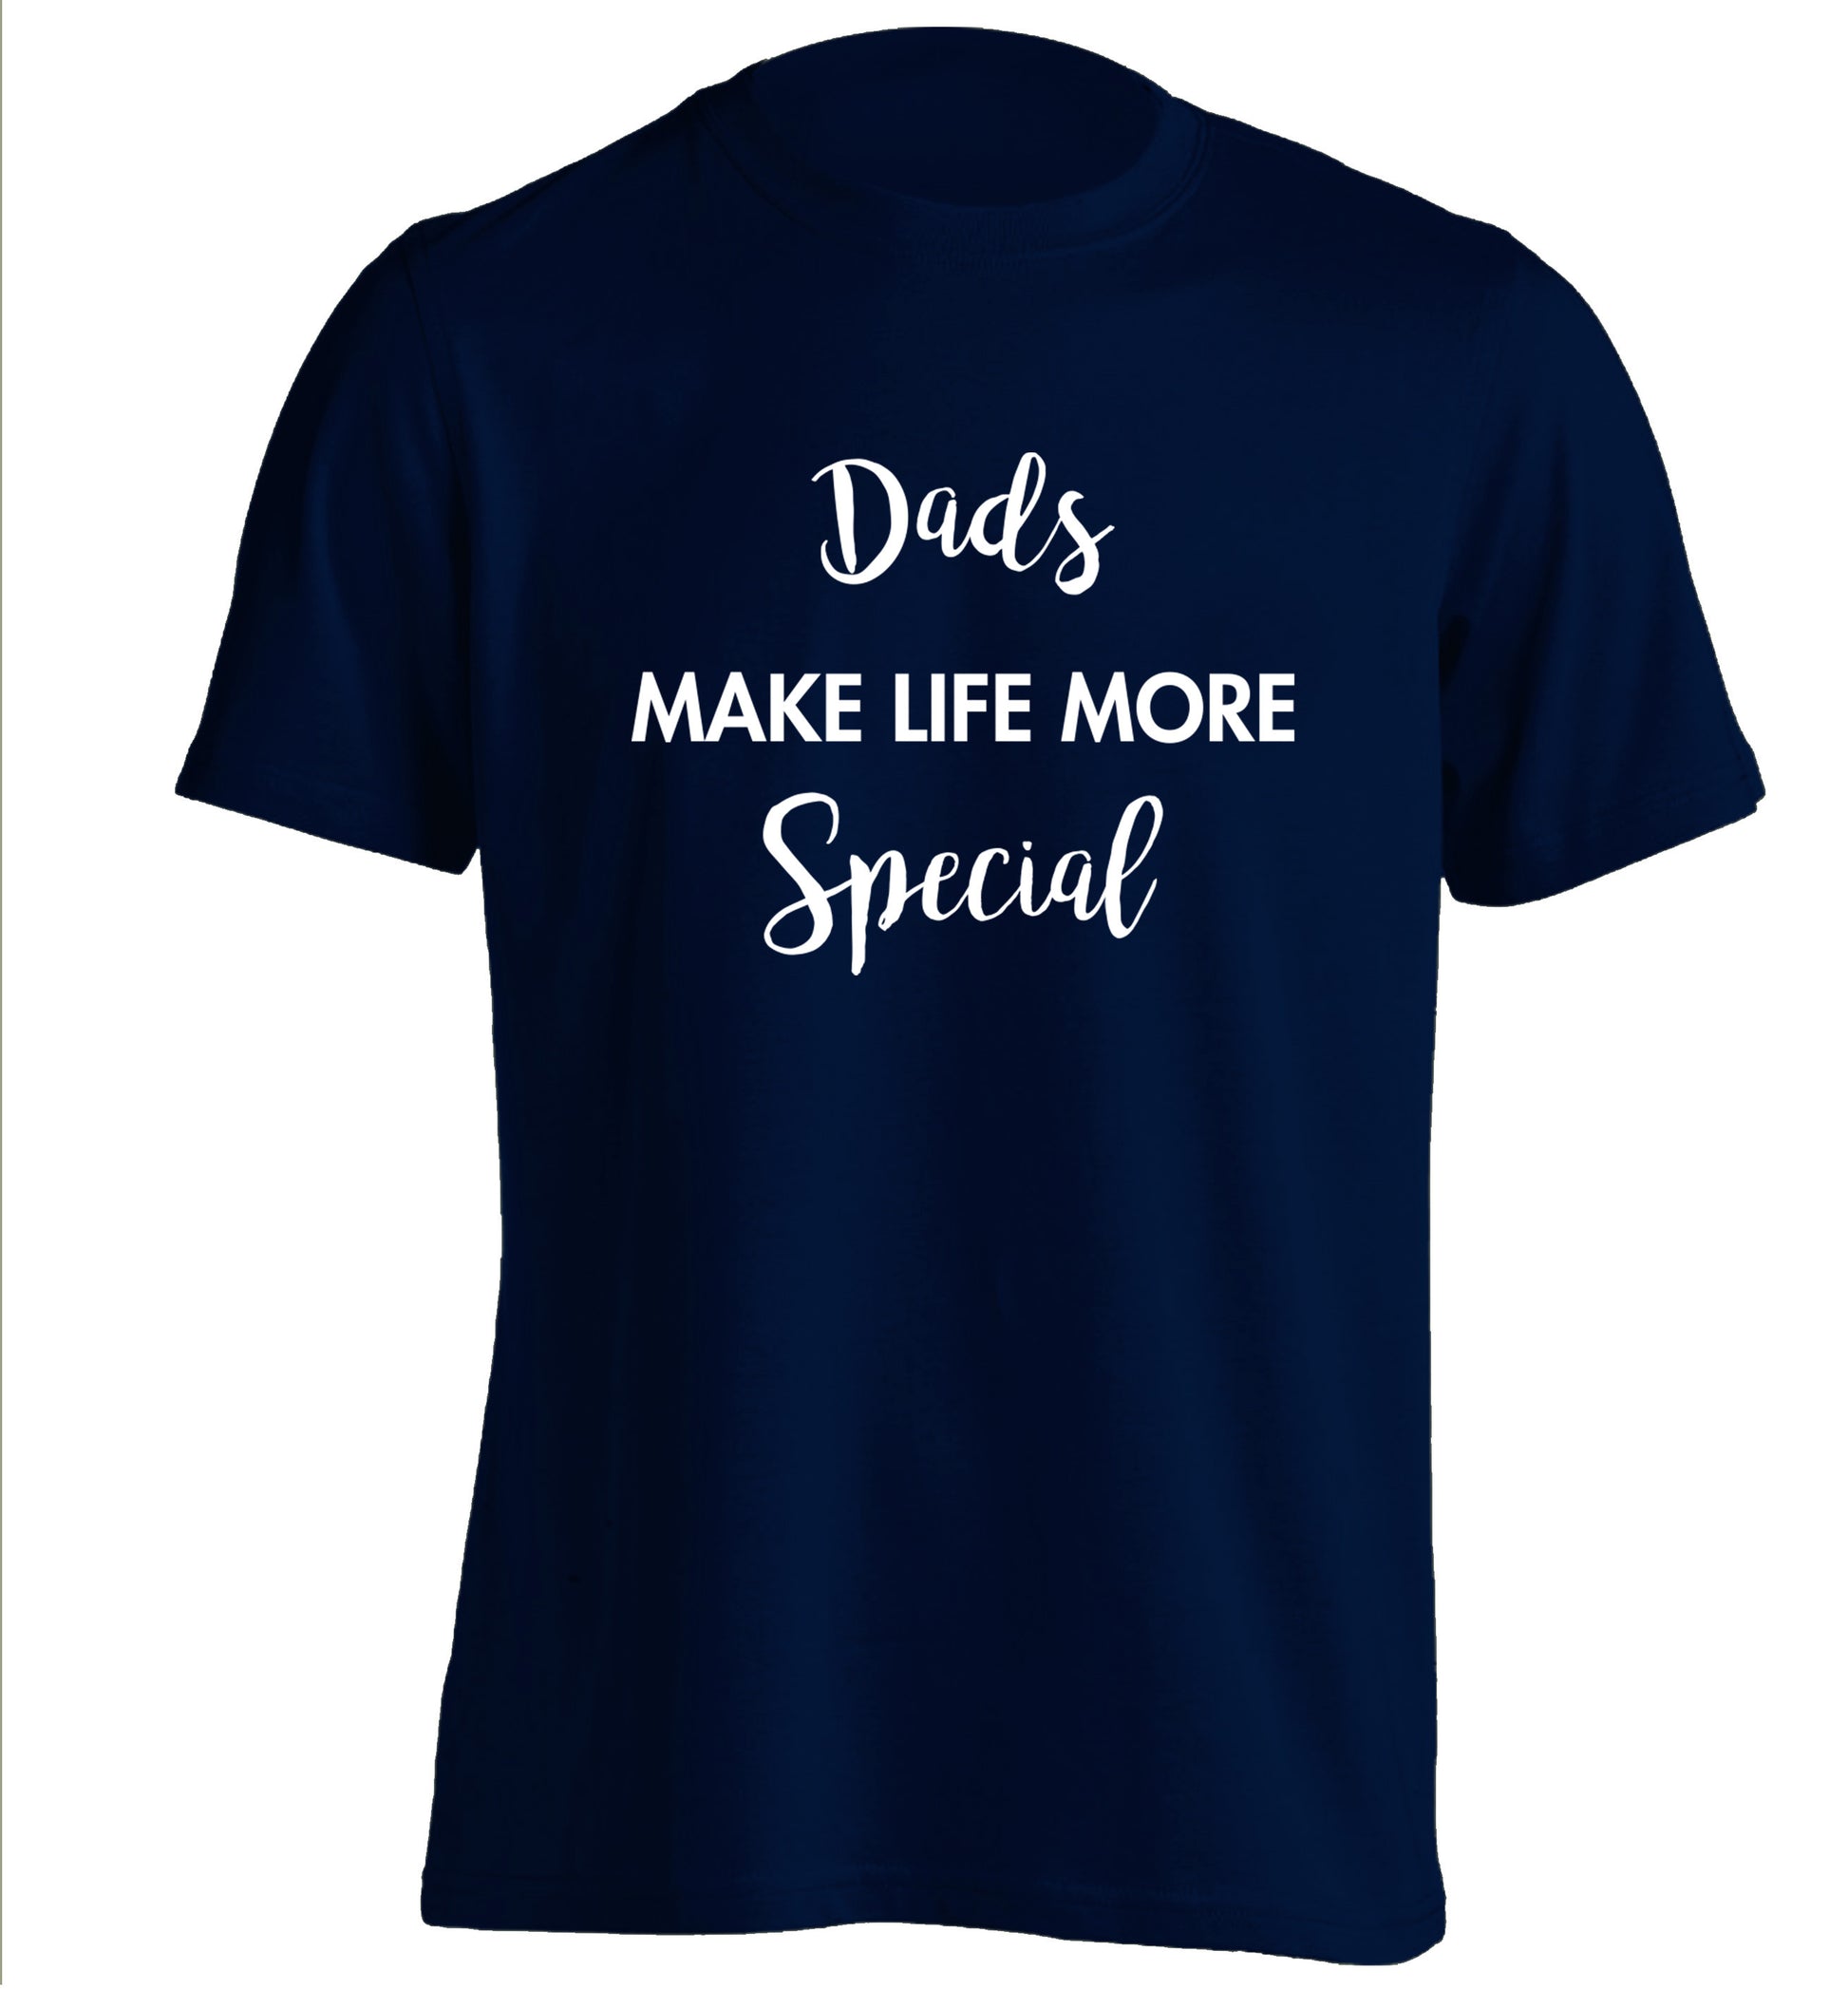 Dads make life more special adults unisex navy Tshirt 2XL